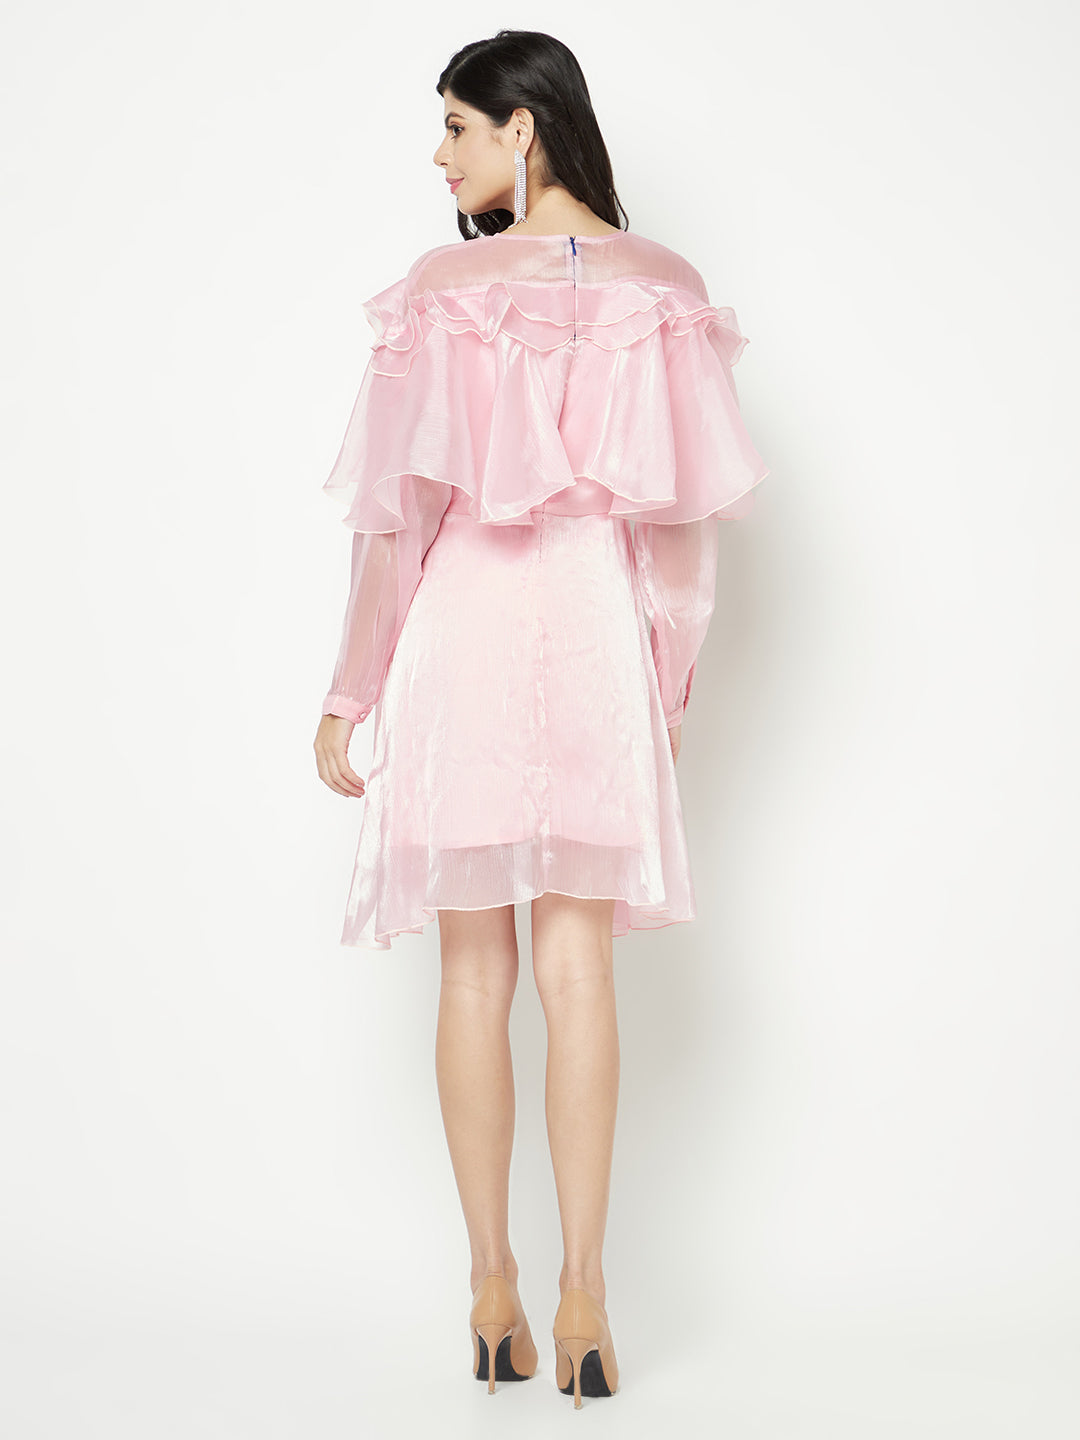 Cotton Candy Fly Dress